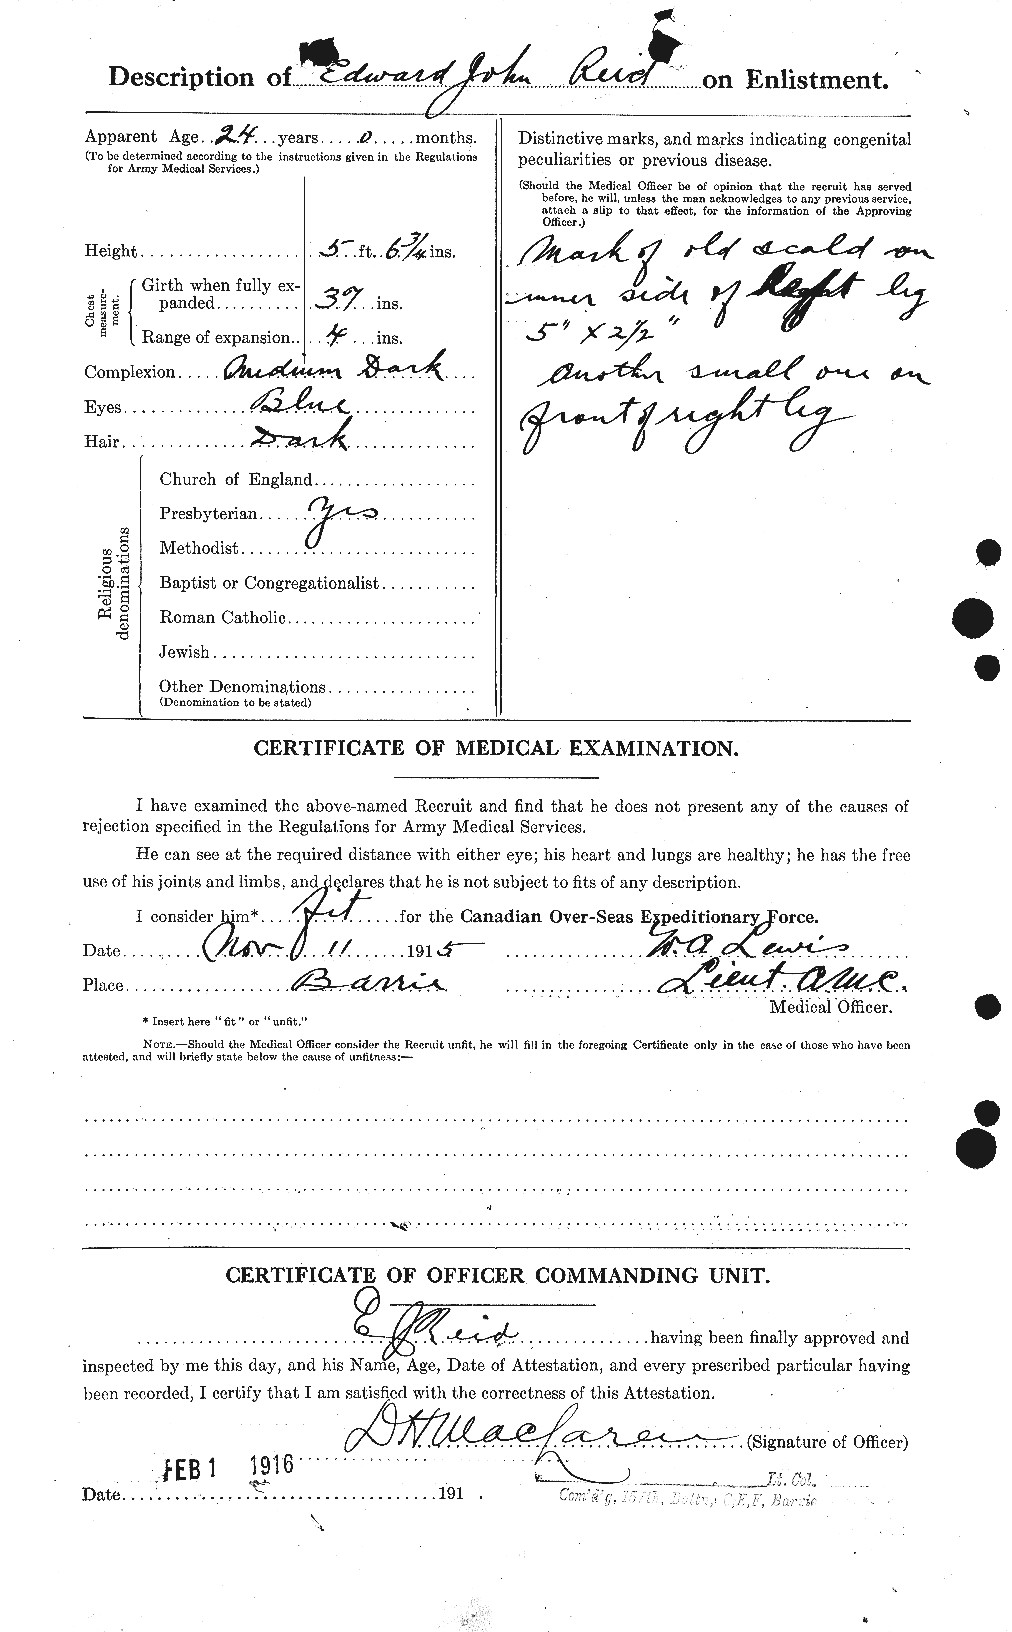 Personnel Records of the First World War - CEF 597987b